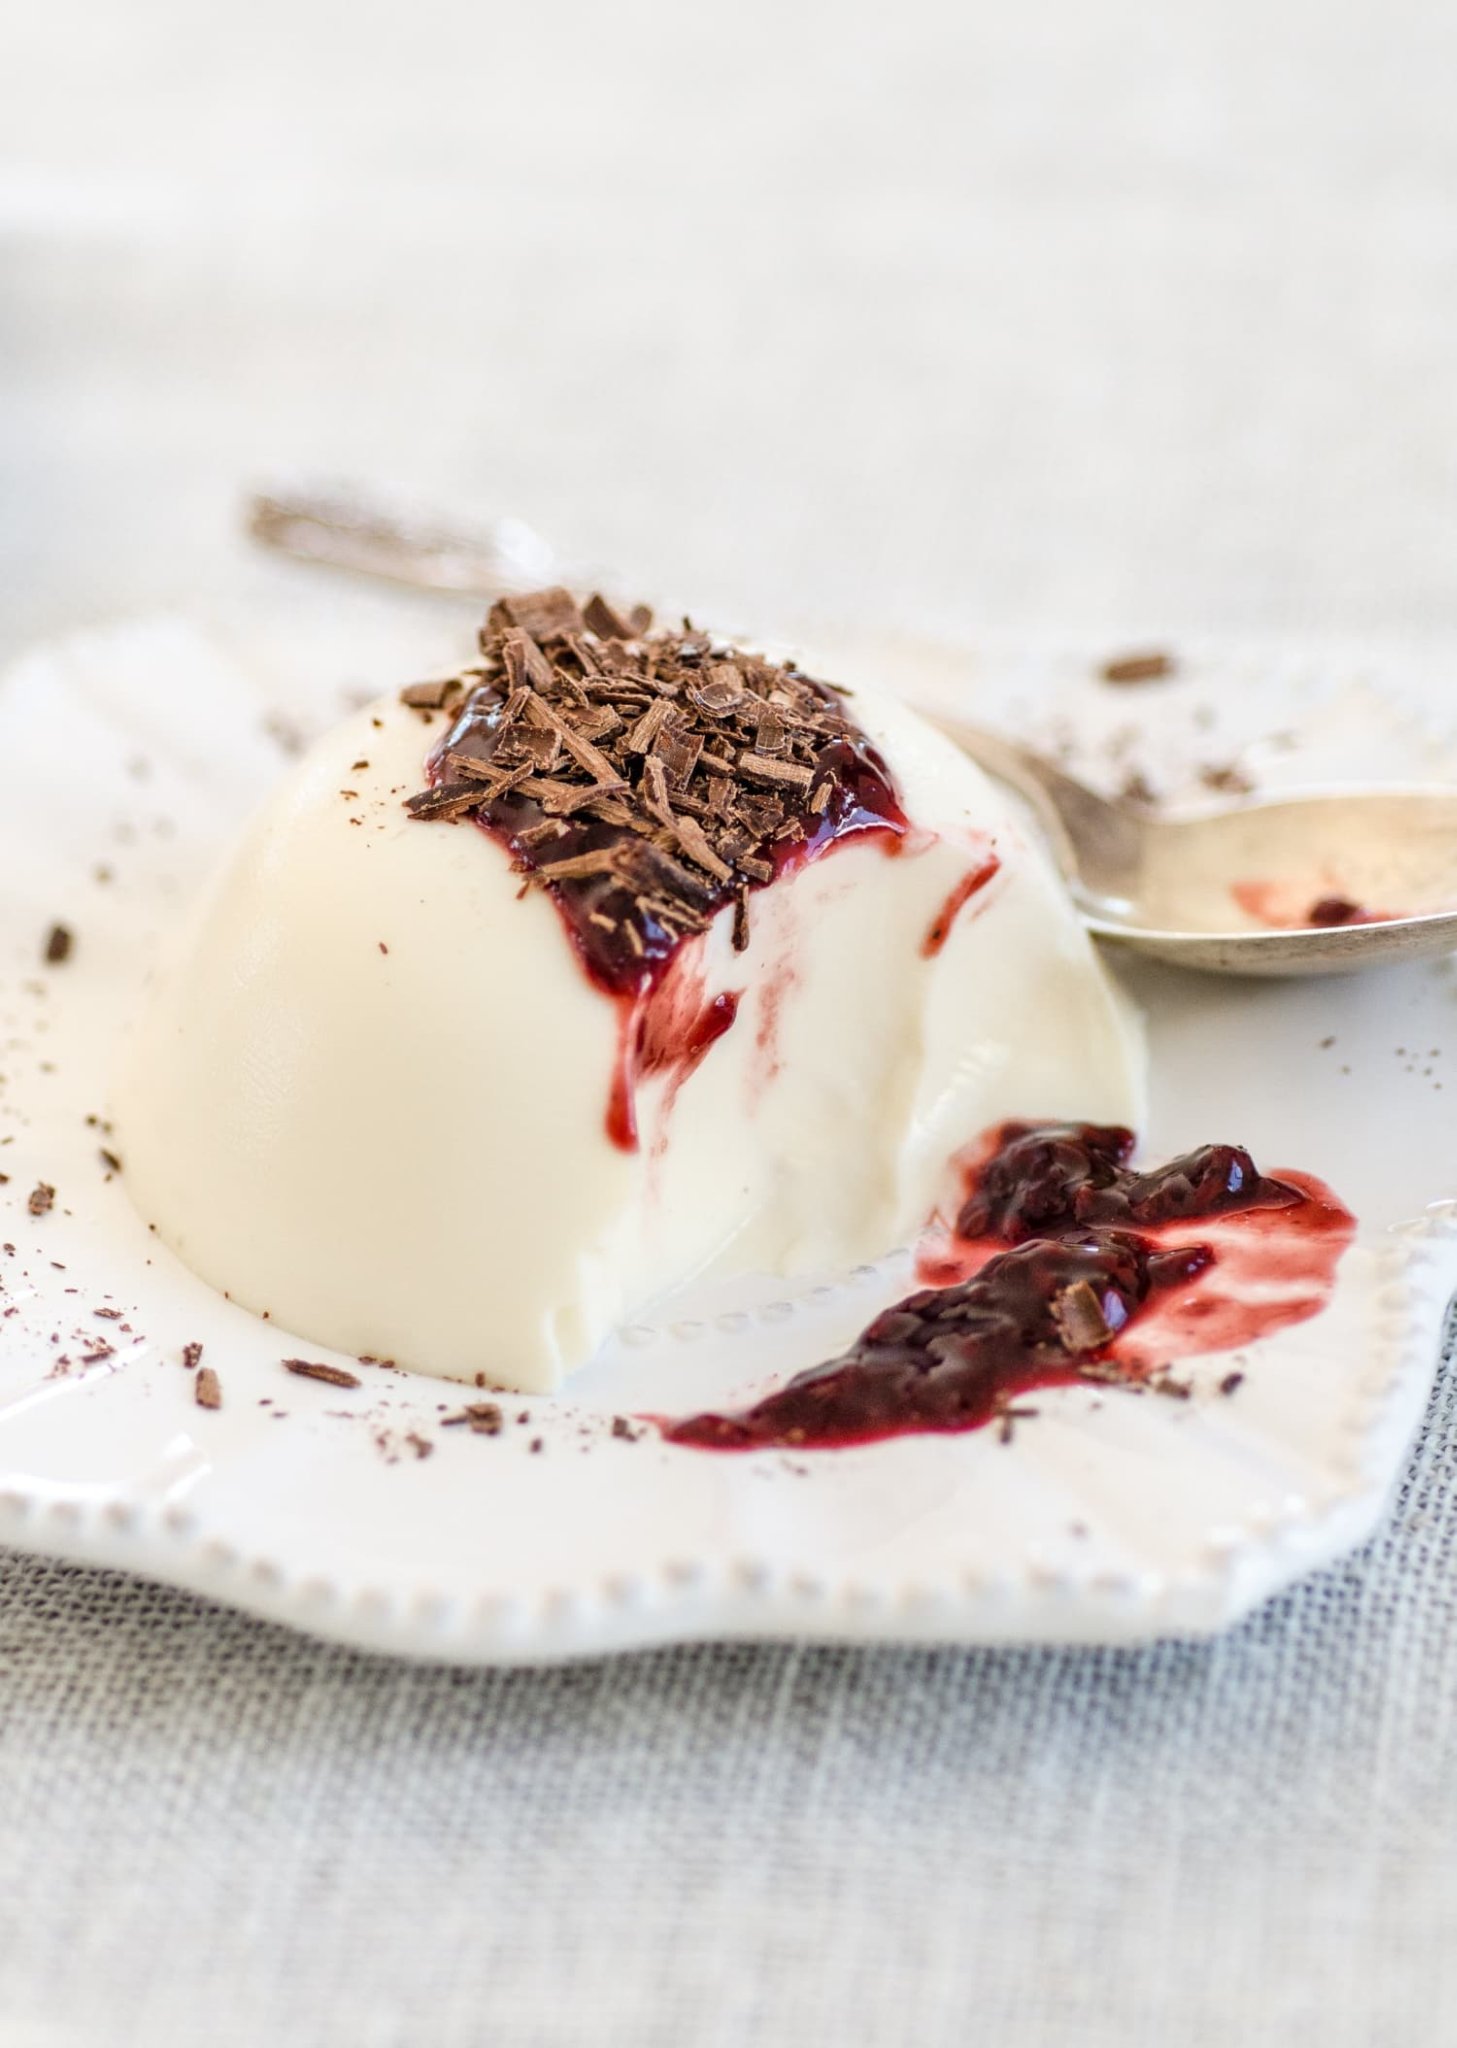 Panna Cotta Is The Easiest & Most Impressive Dessert You Can Make